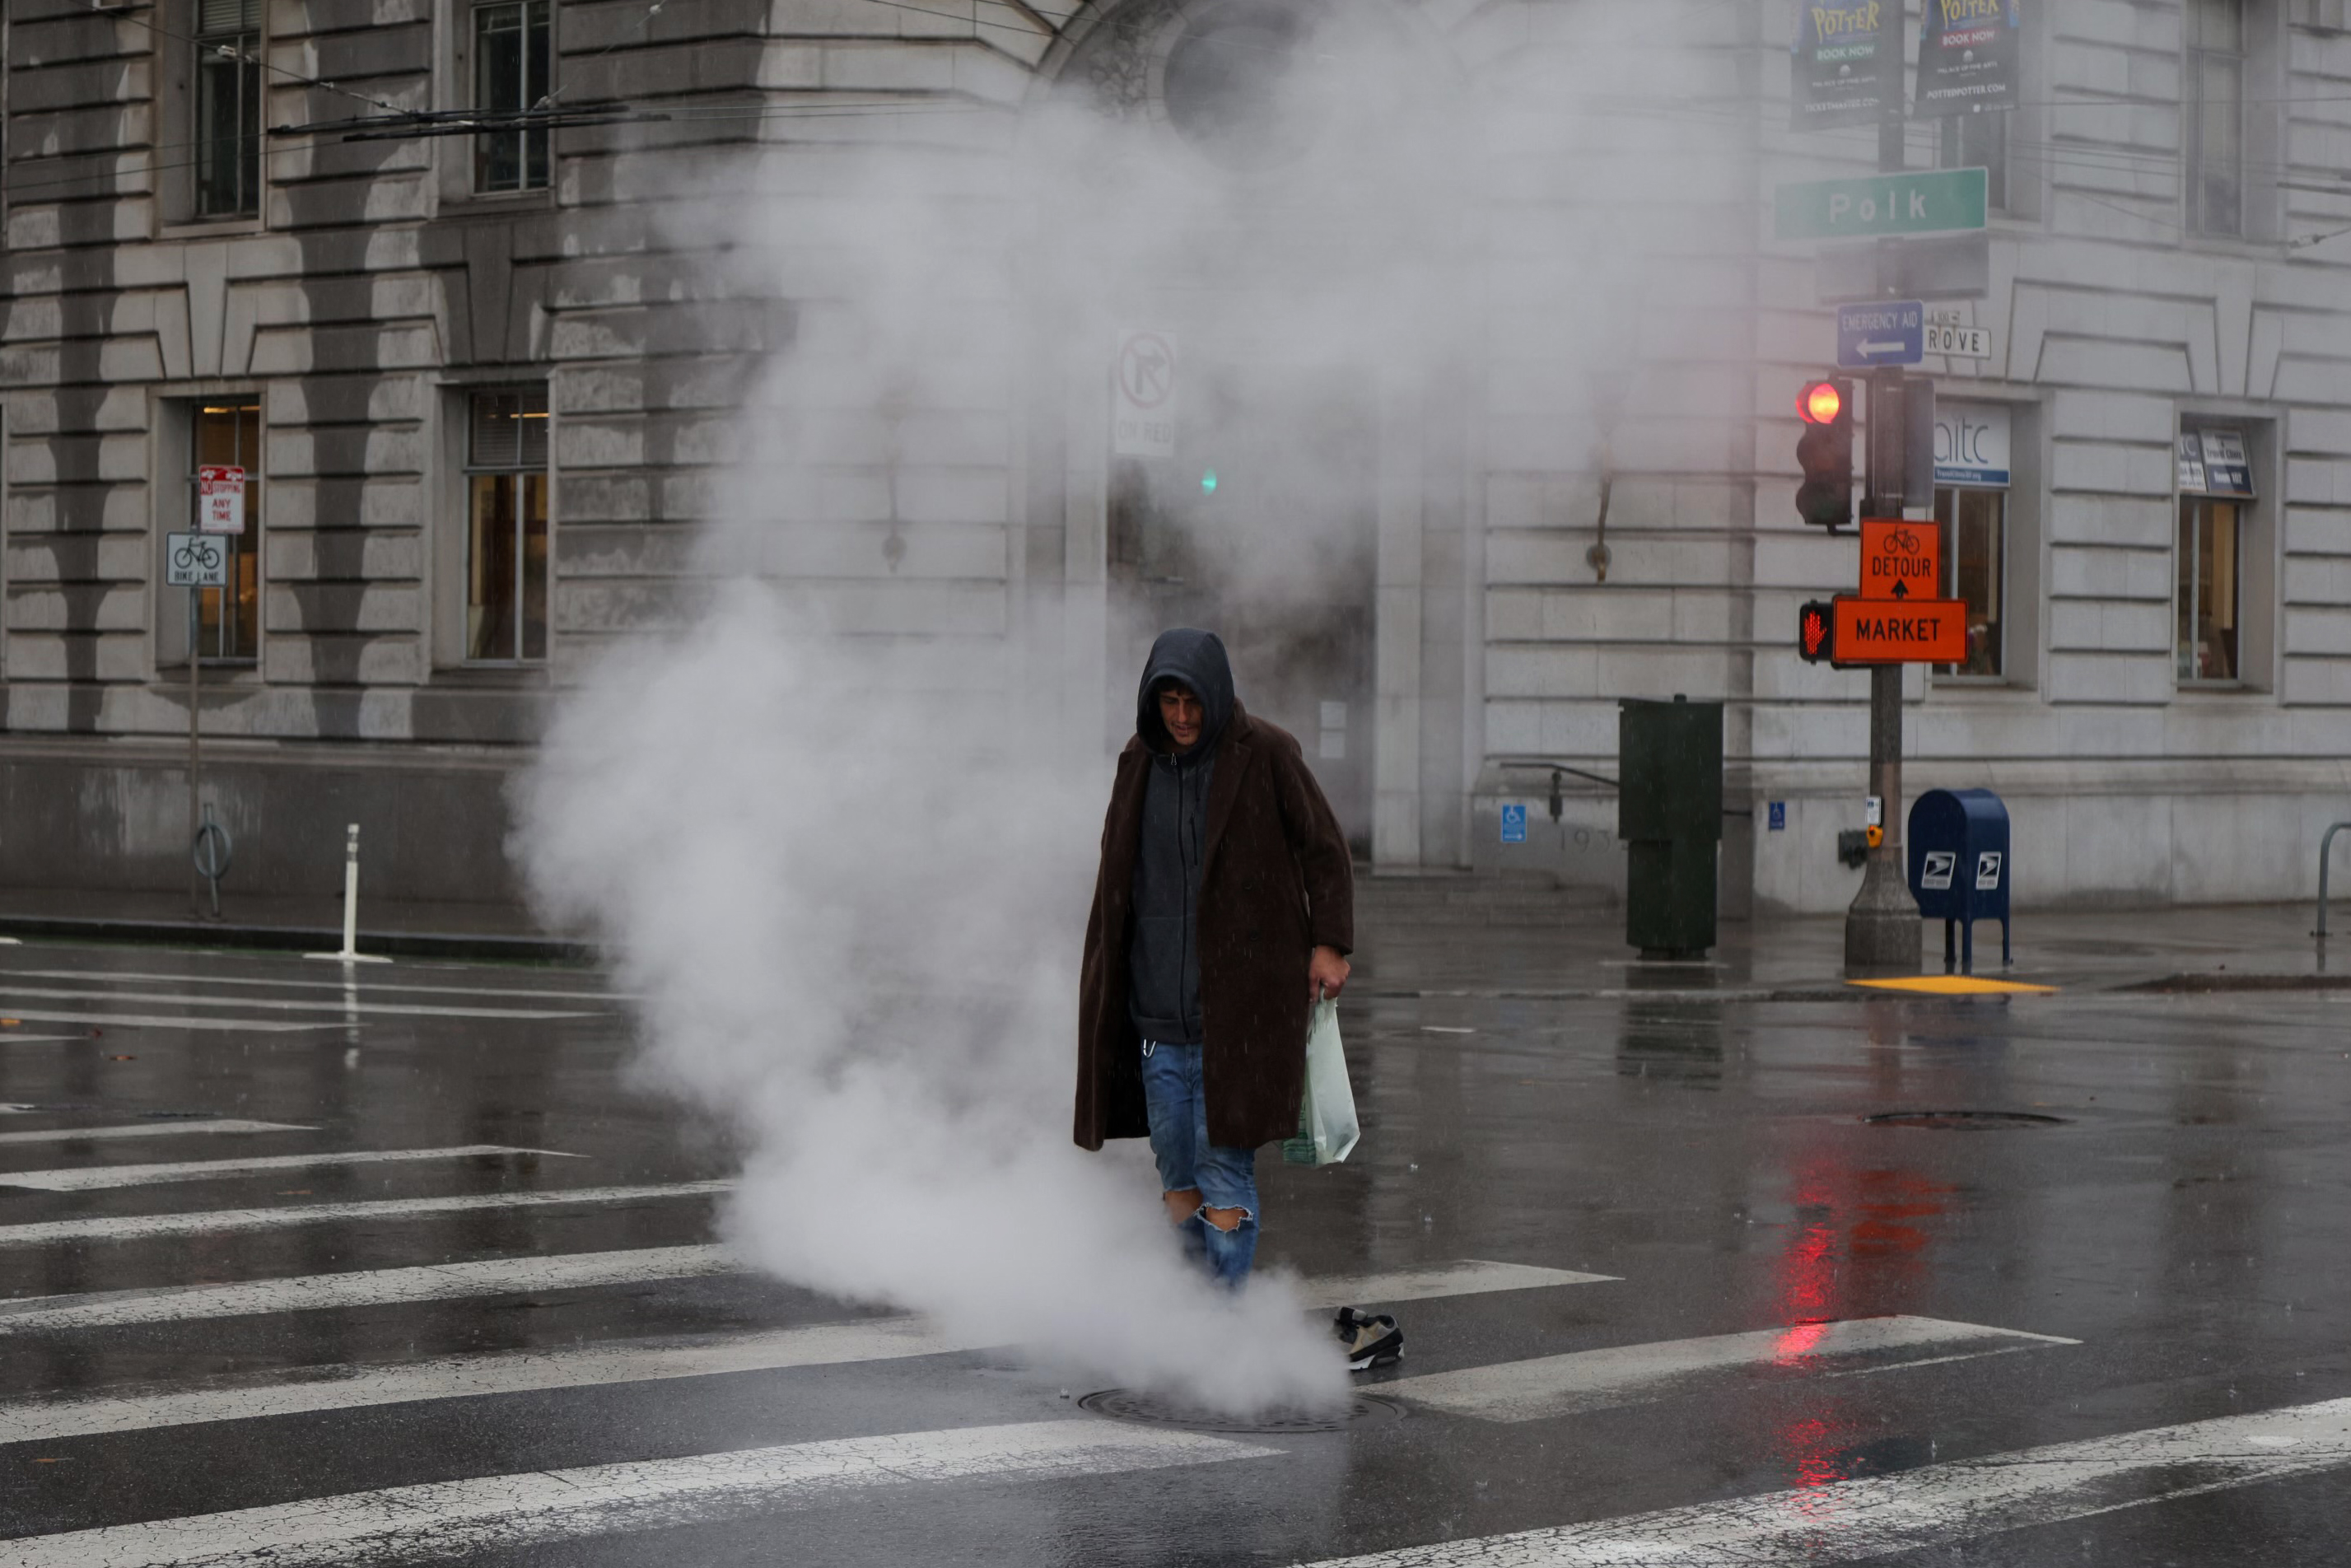 A person crosses a wet street with steam rising from a manhole. It's a gloomy, overcast day.